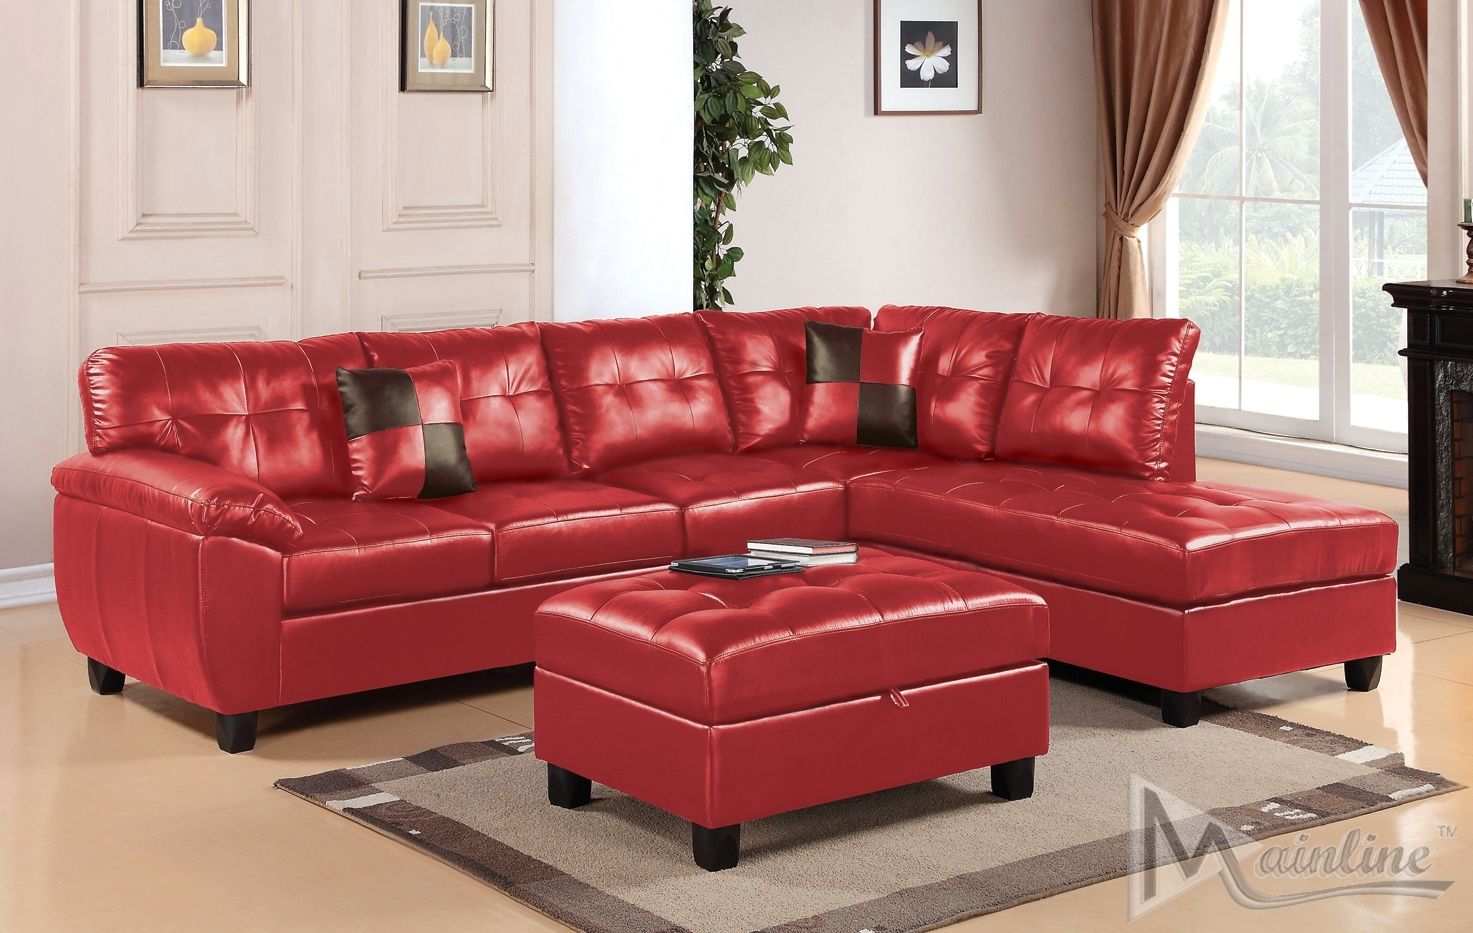 Luxury Sectional Sofas Dallas 92 For Your Sleeper Chairs And Sofas Intended For Dallas Sectional Sofas (View 6 of 10)